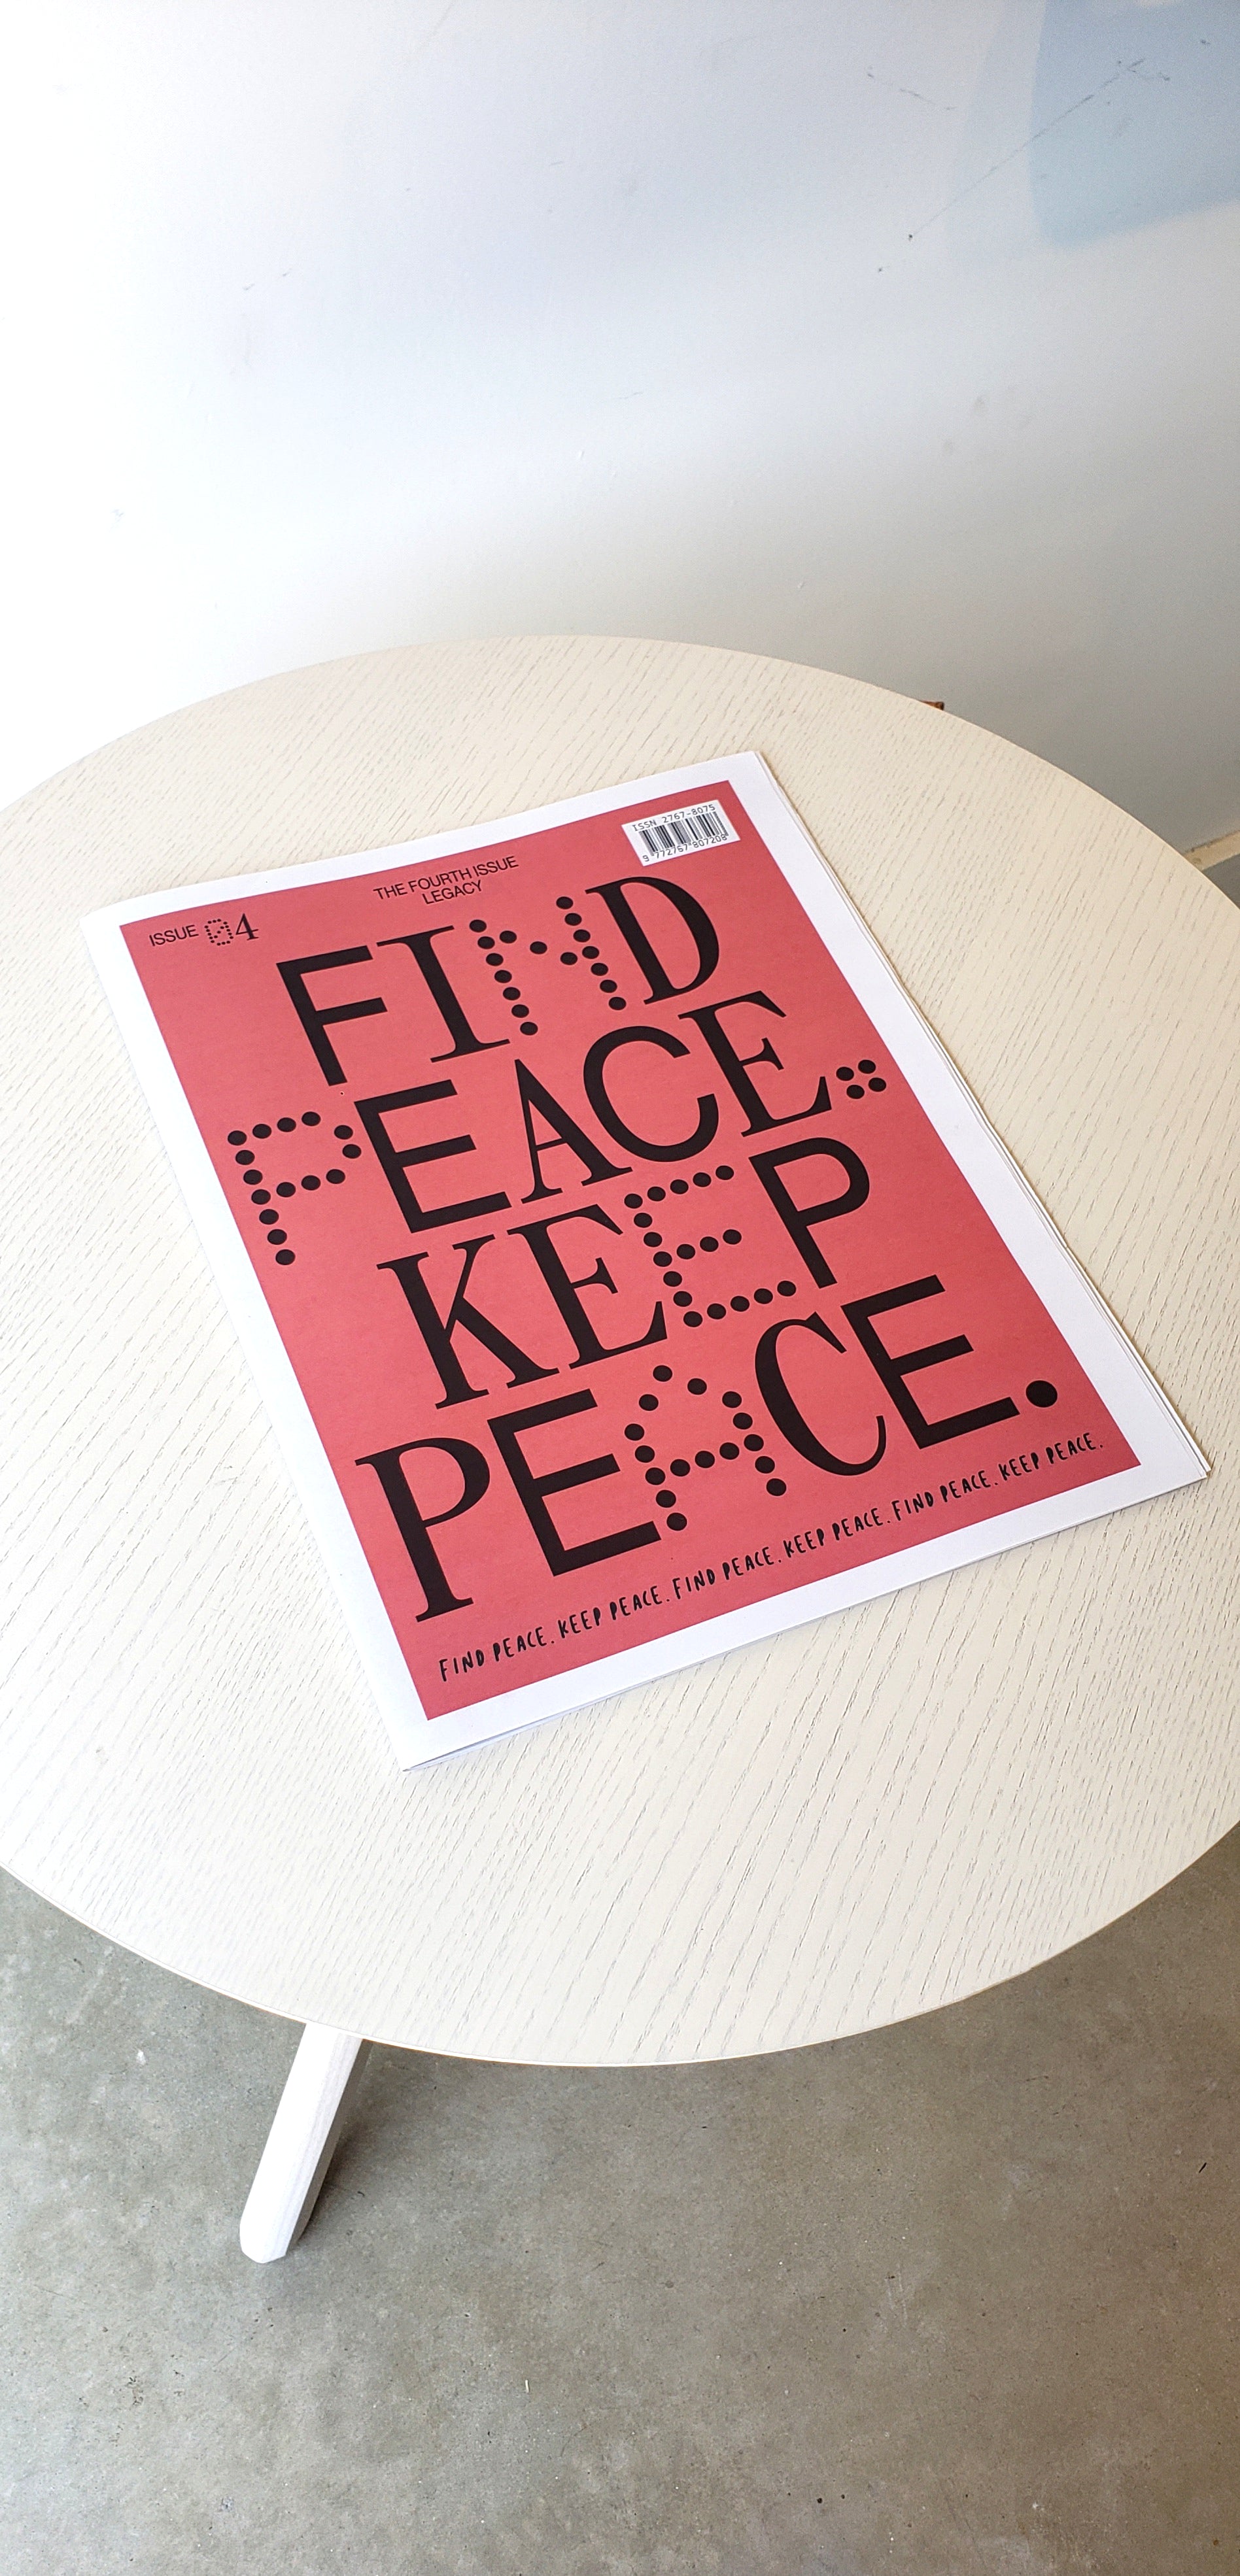 "find peace. keep peace." - the third issue